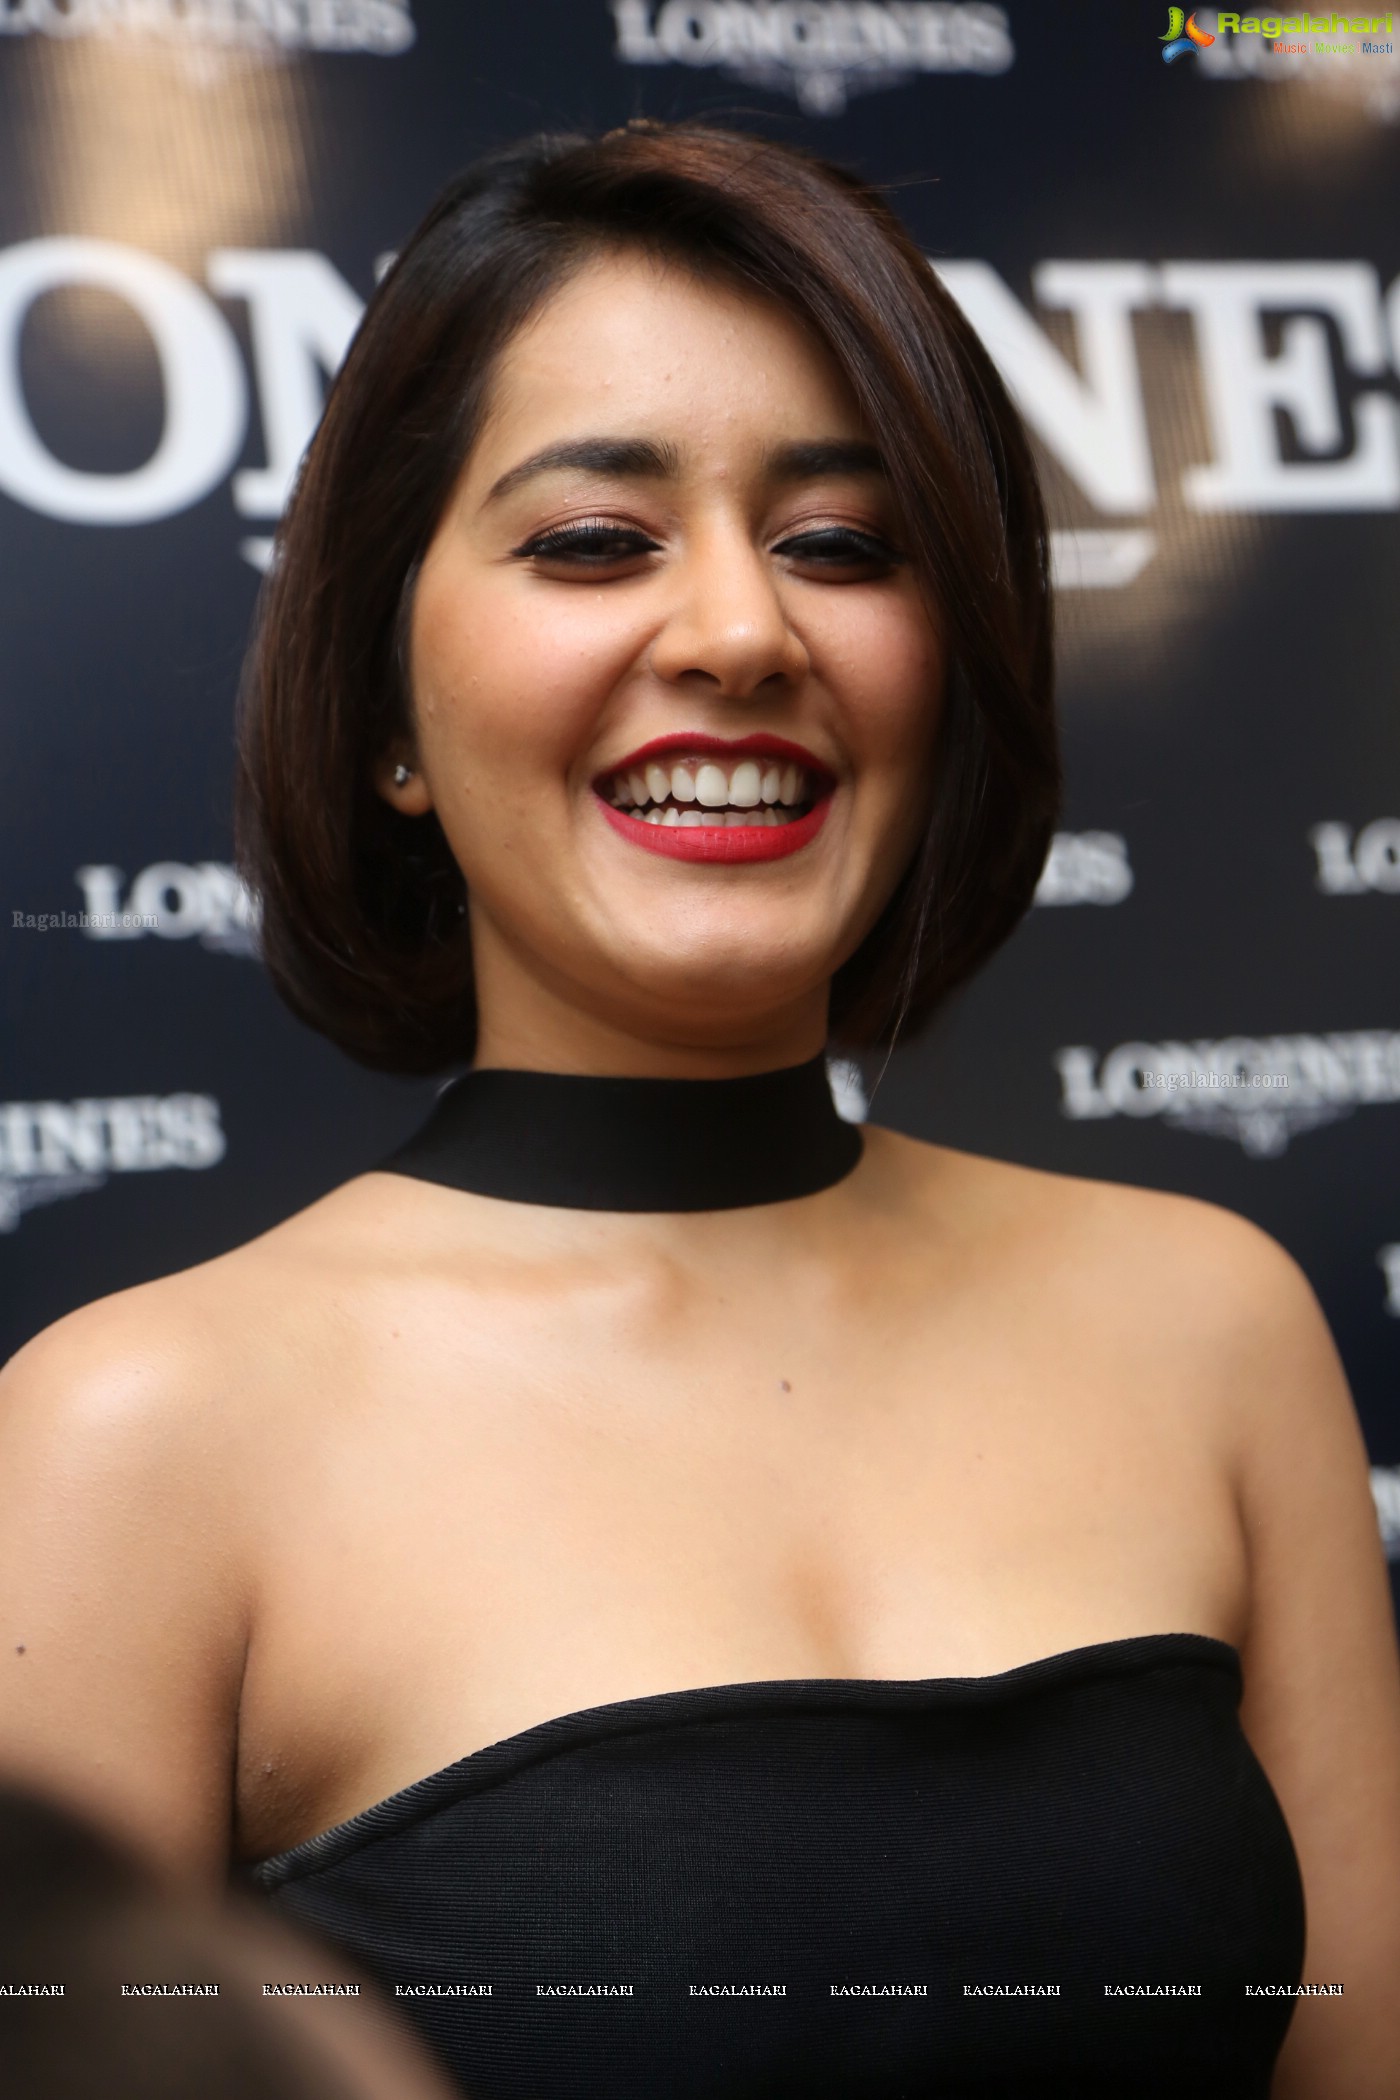 Raashi Khanna at Longines Boutique Exclusive HQ Photos,  Jubilee Hills, Hyderabad